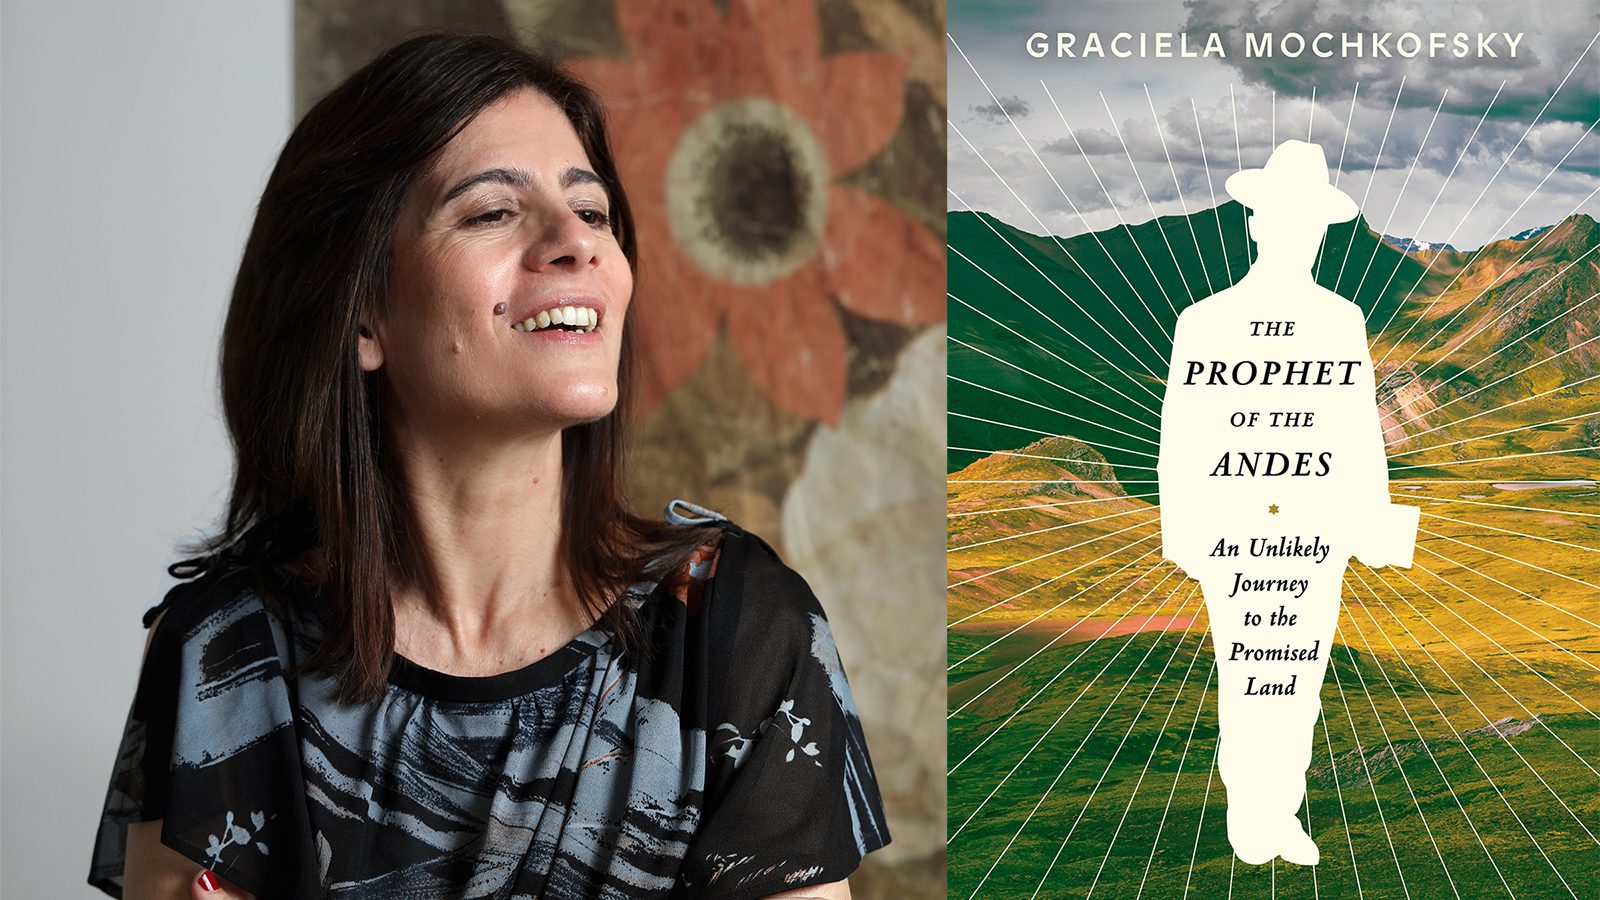 Author Graciela Mochkofsky and her new book, "The Prophet of the Andes." Courtesy images